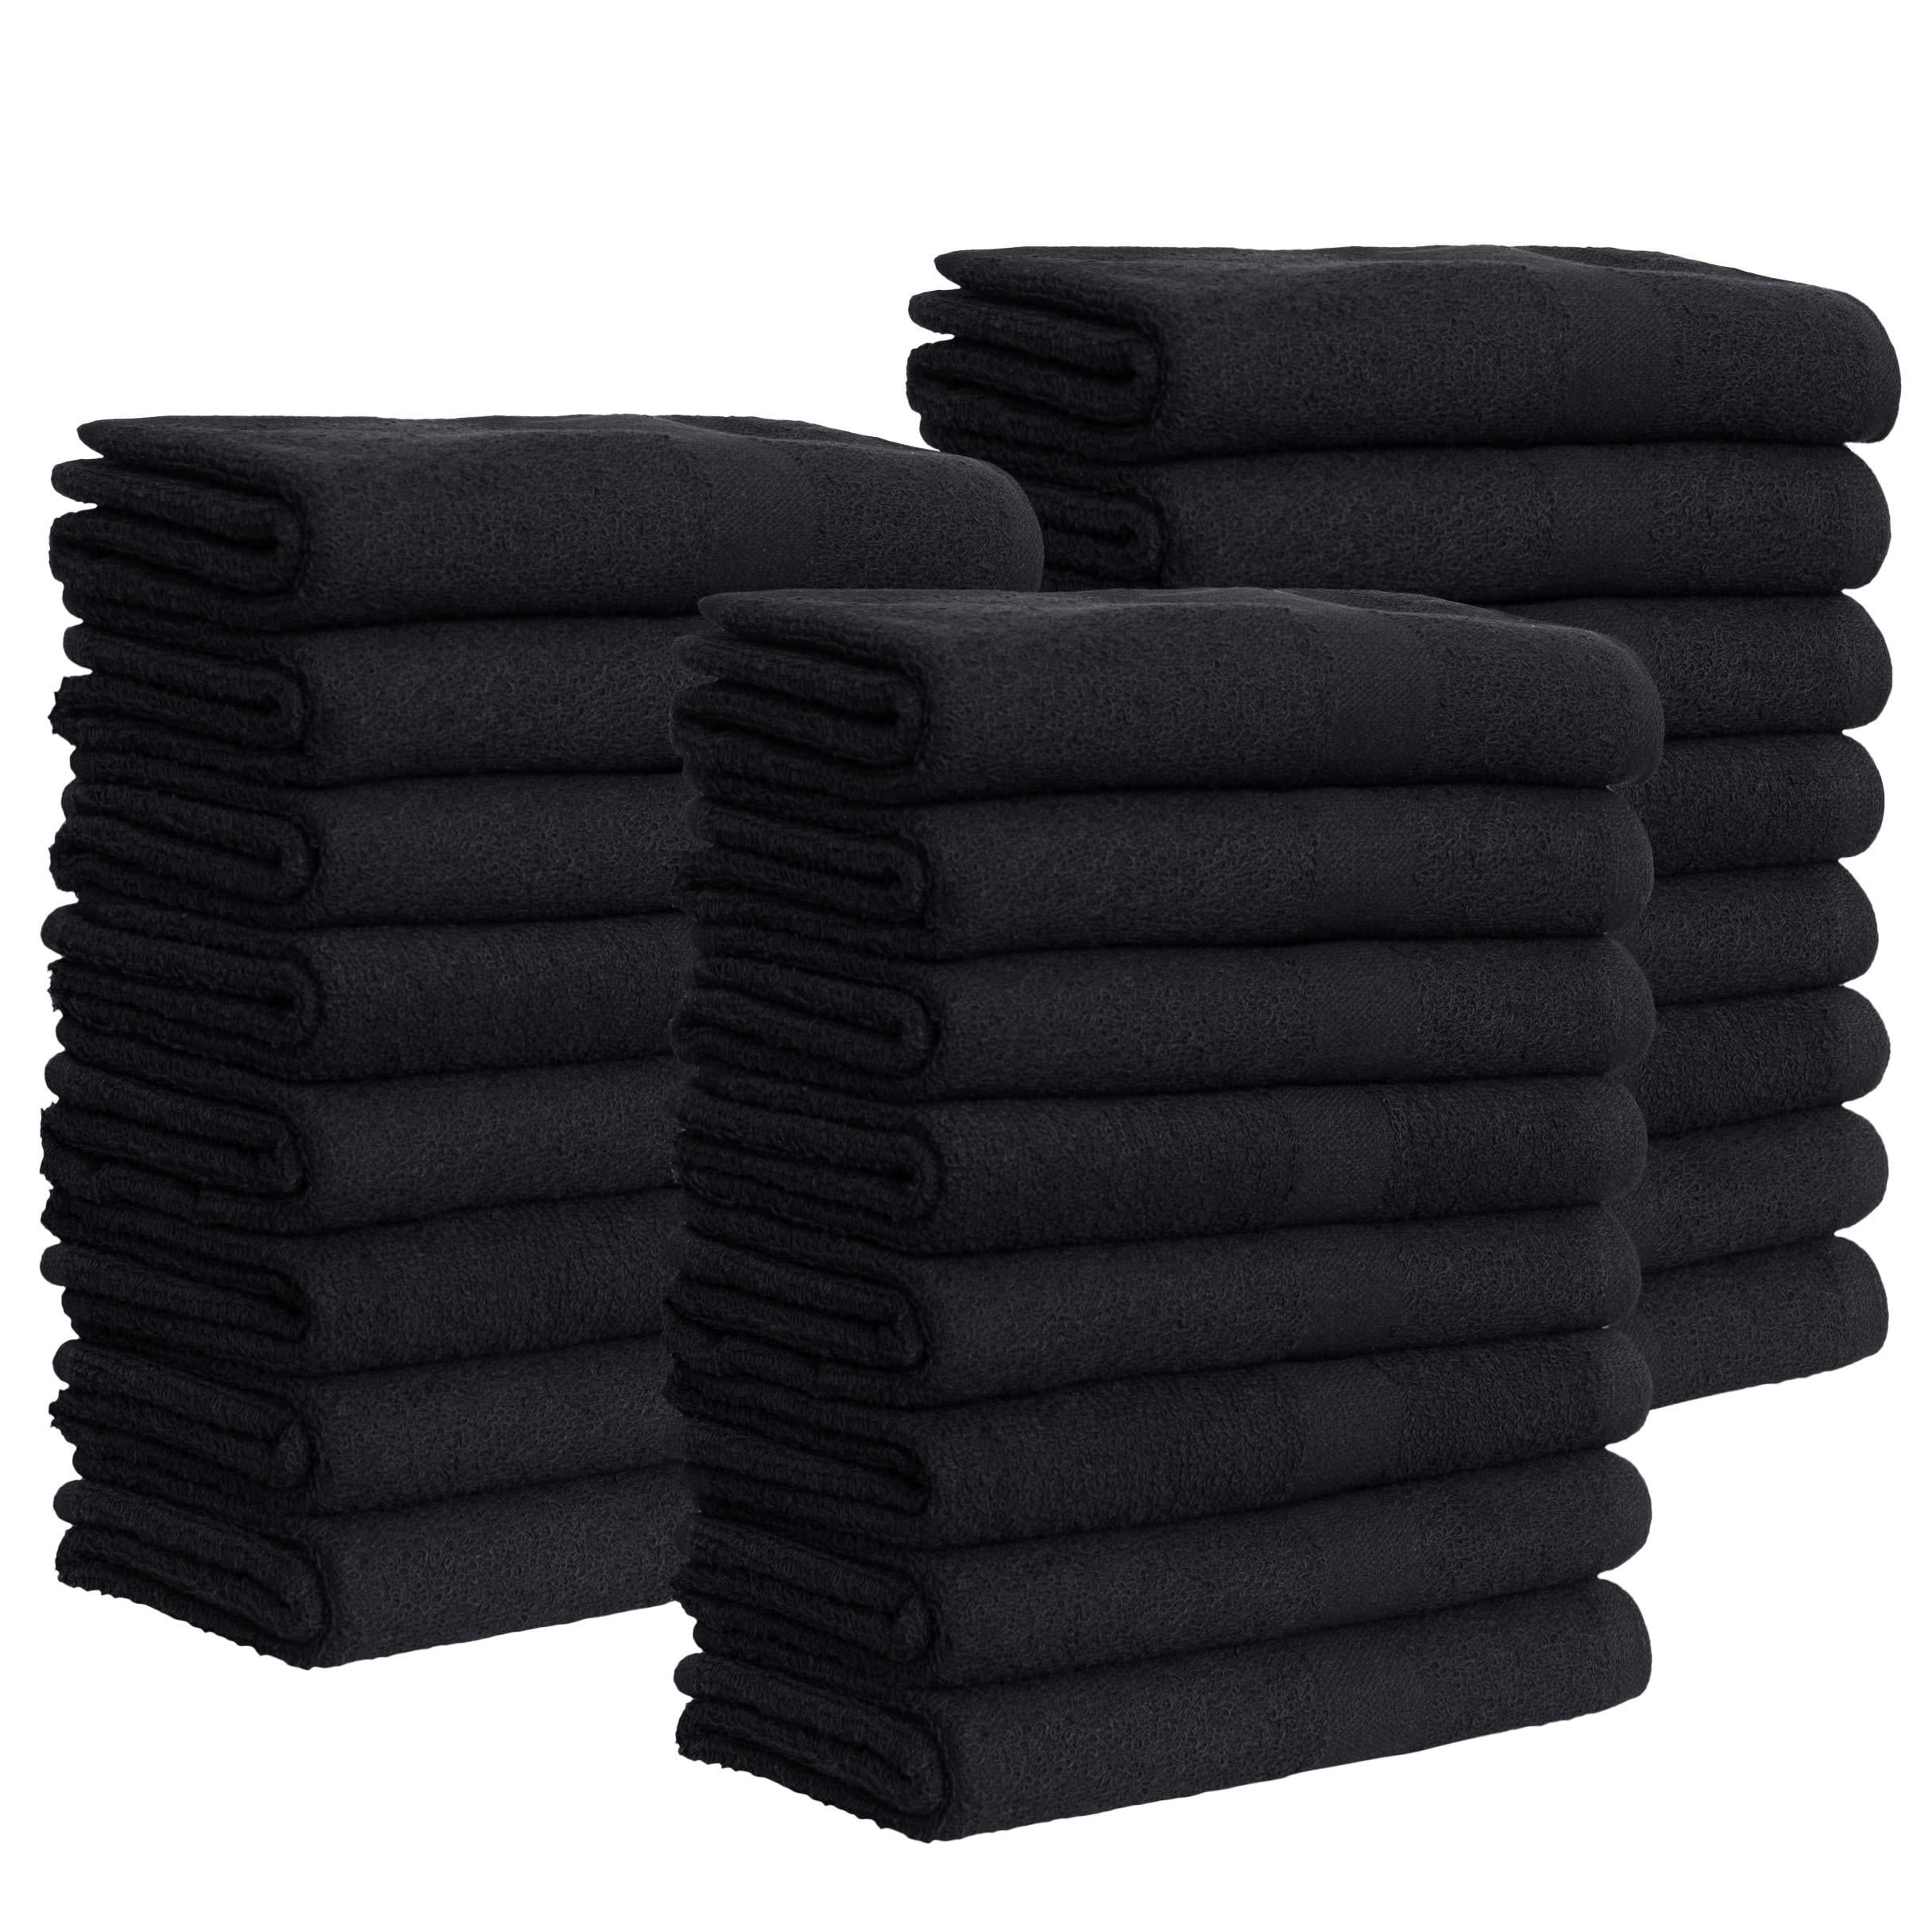 36 new 100% cotton 16x27 hand towels salon gym workout hair styling manicure spa 